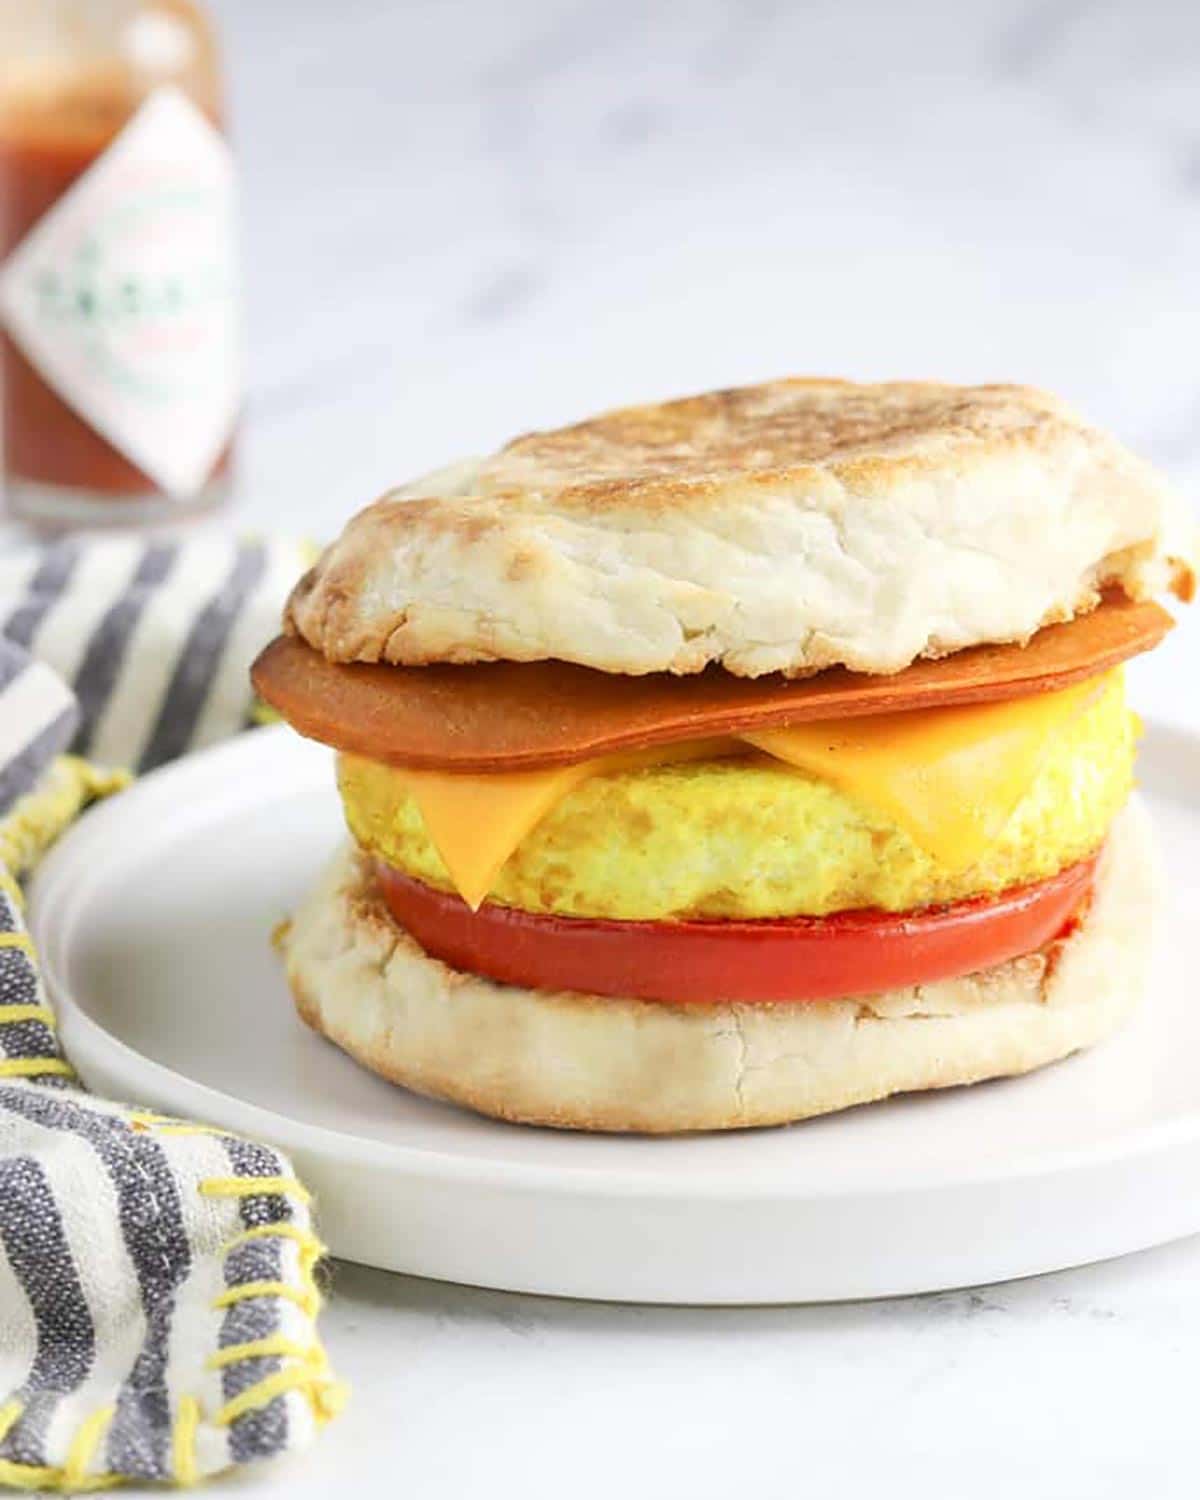 A English muffin with cheese, meat and egg.